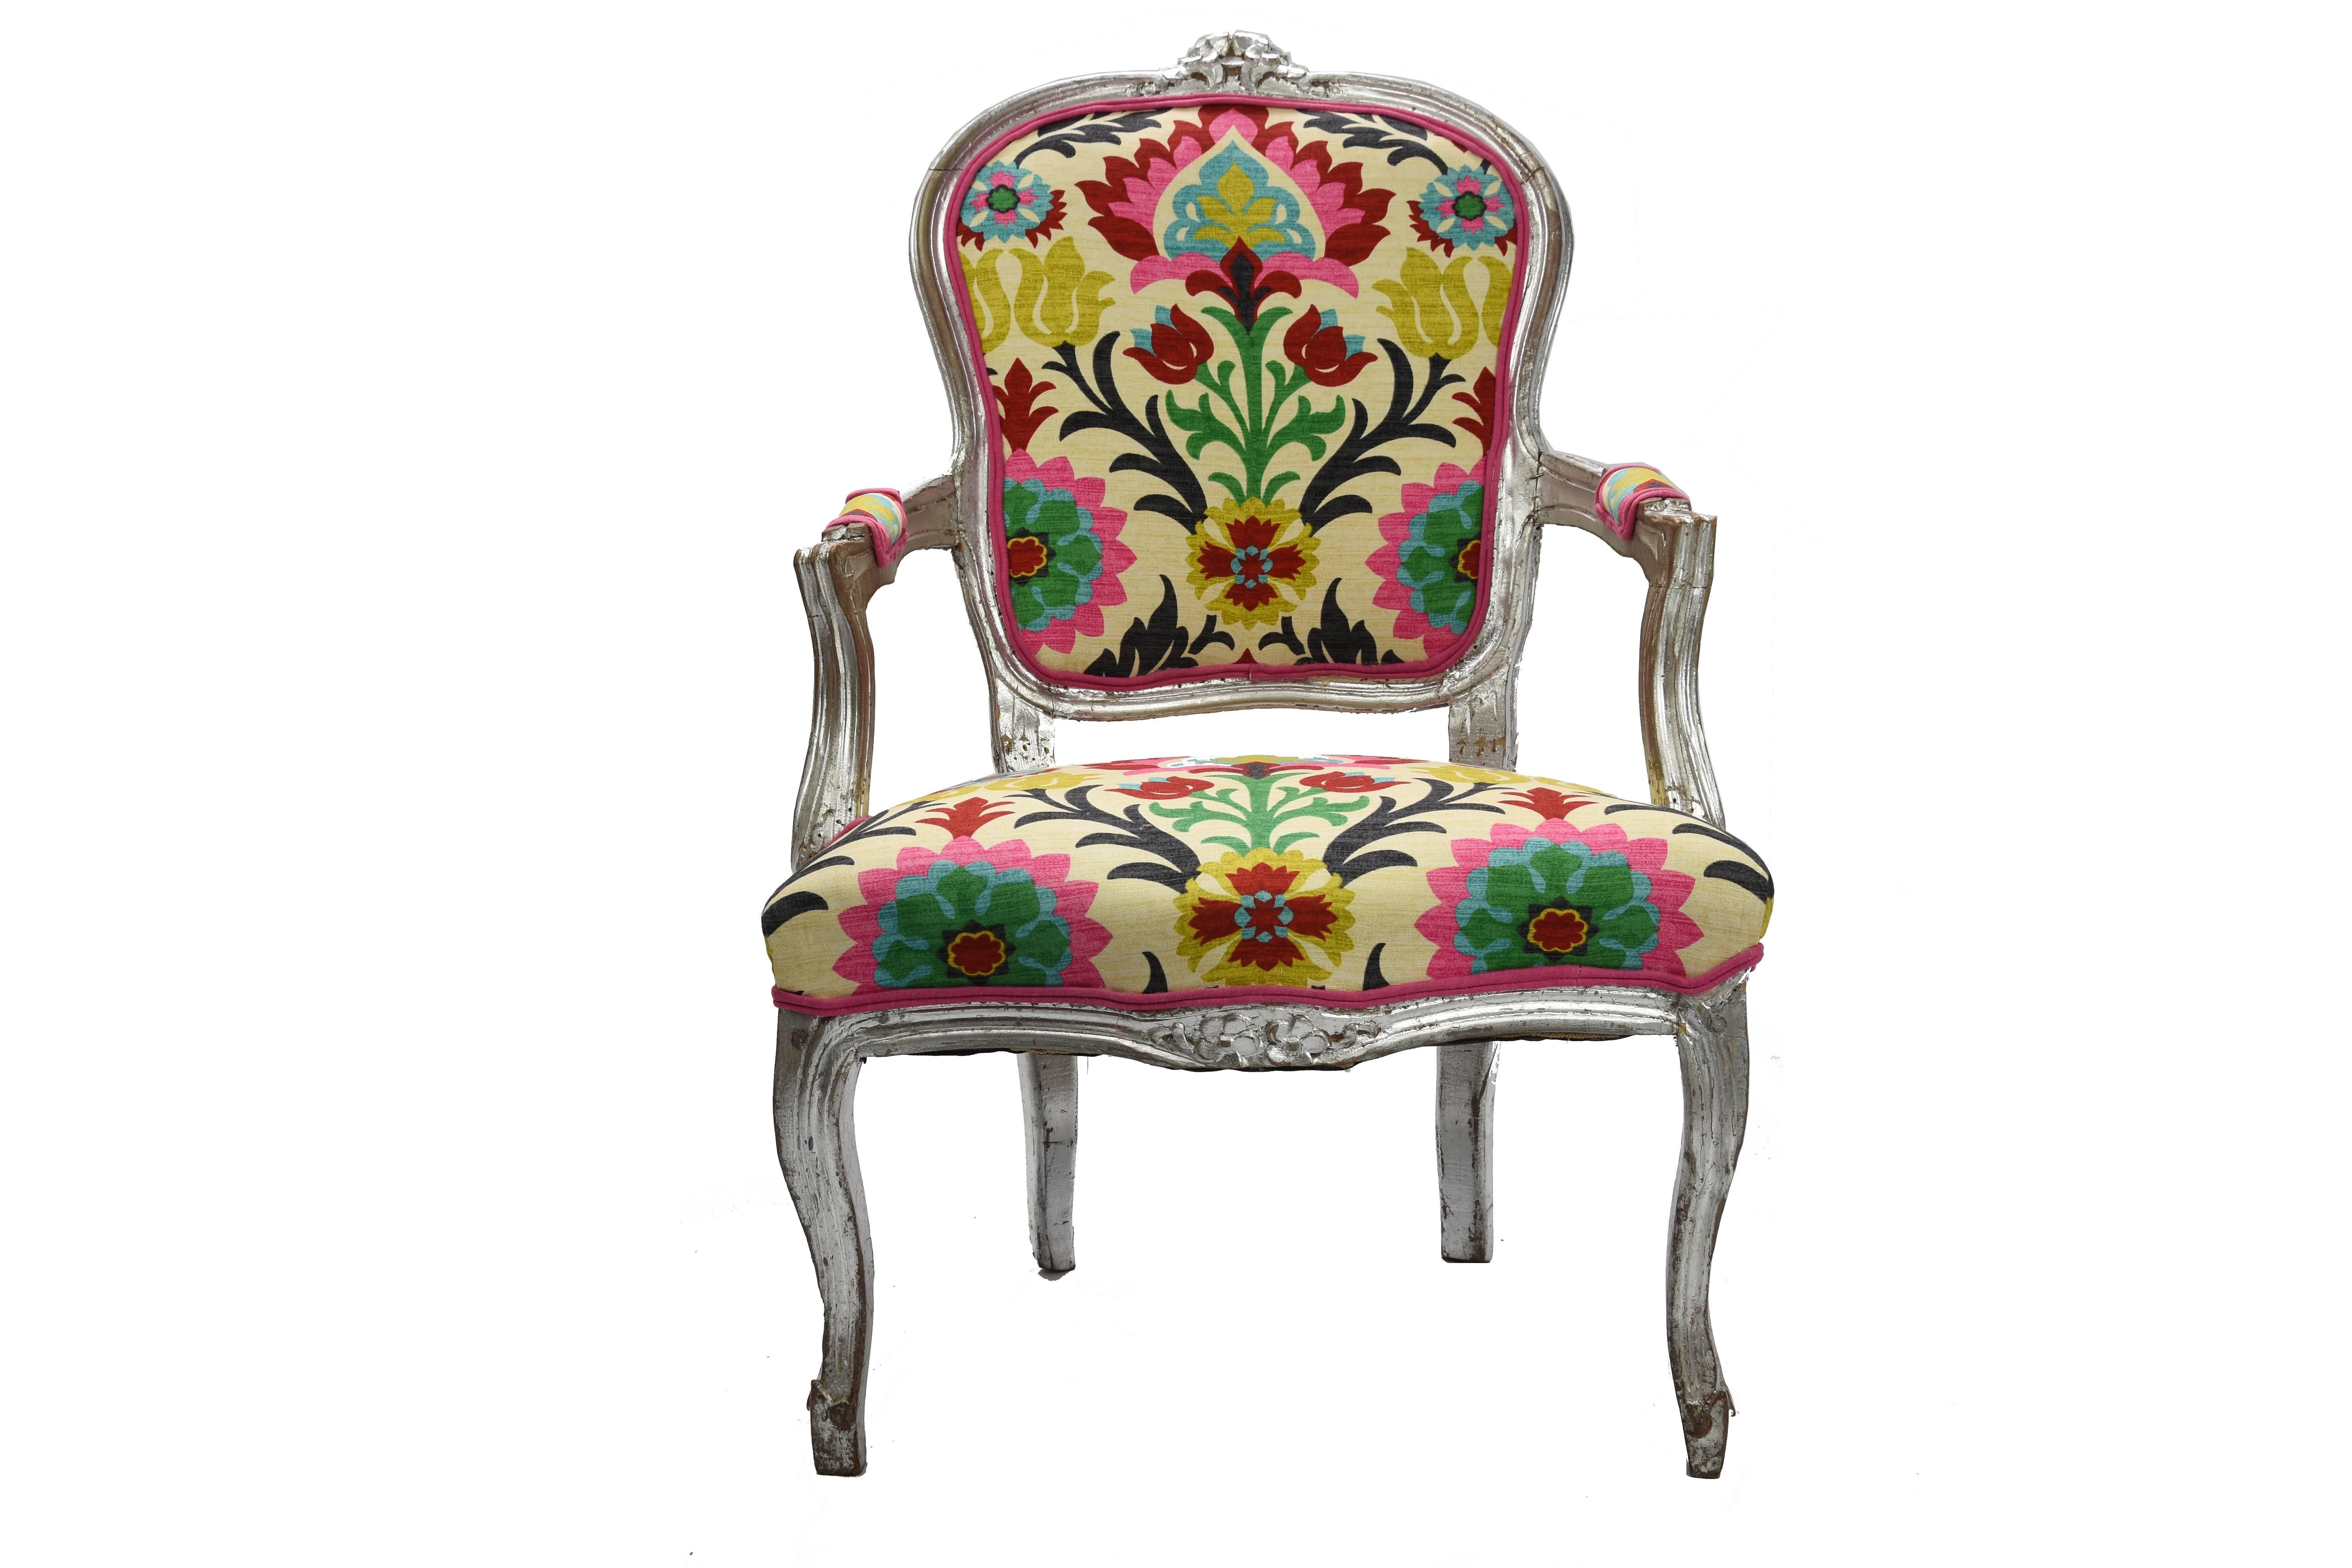 Reupholstered and cared to have a unique look, this Louis XVI style armchair has a vintage finish. Featuring a beautiful Waverly Santa Maria Desert Flower, this elegant piece can transform your home in a lovely place. Fully upholstered using pink